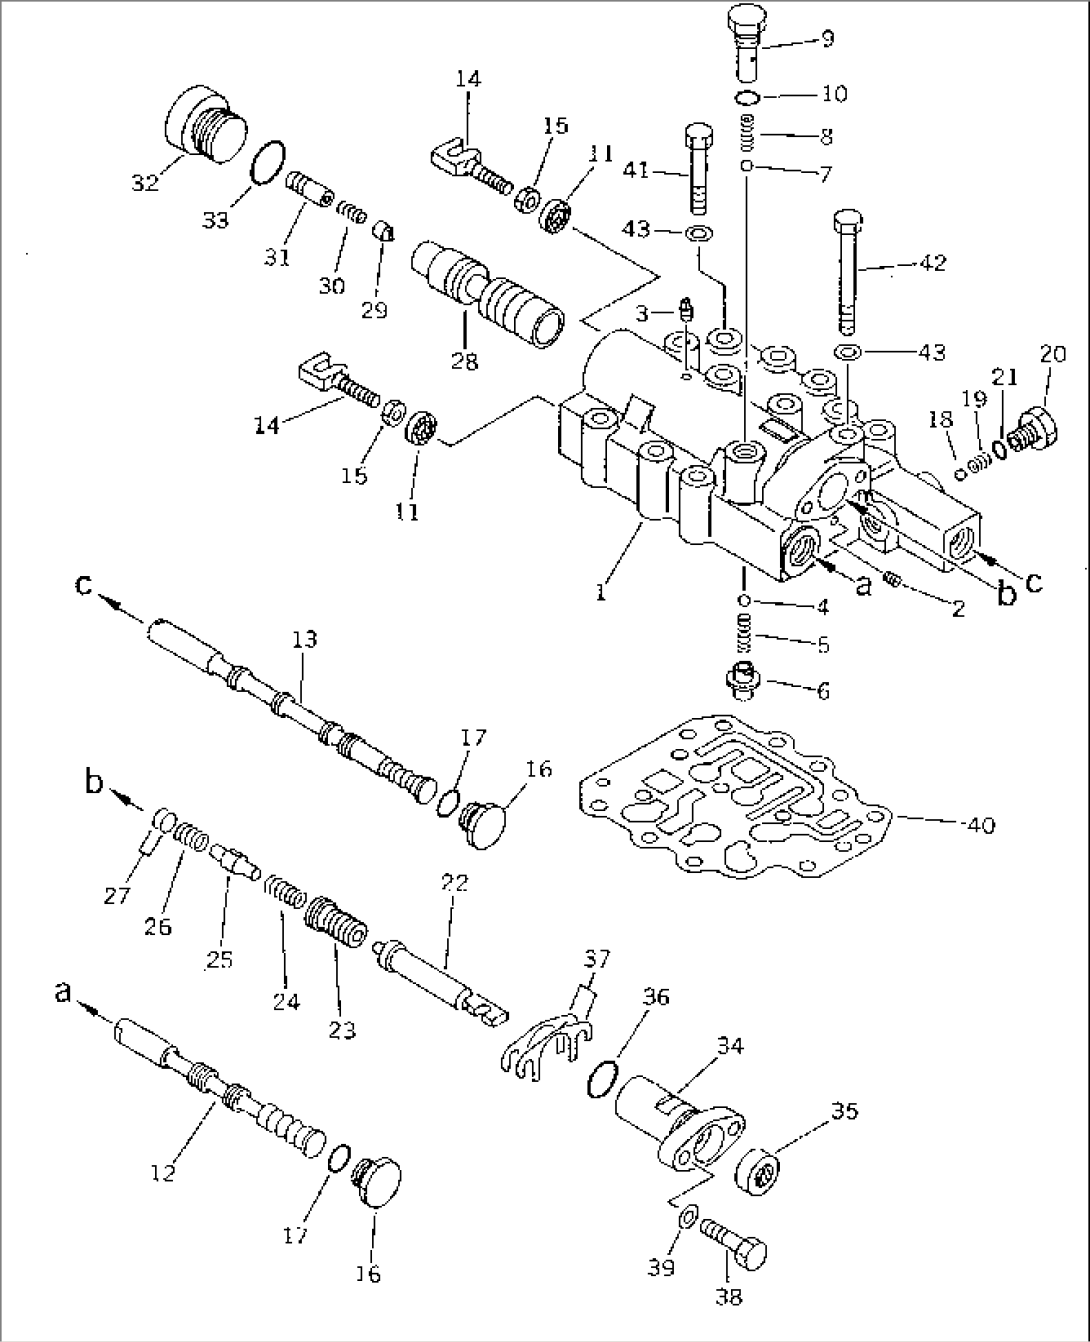 TRANSMISSION VALVE (F2-R2) (SELECTOR AND INCHING)